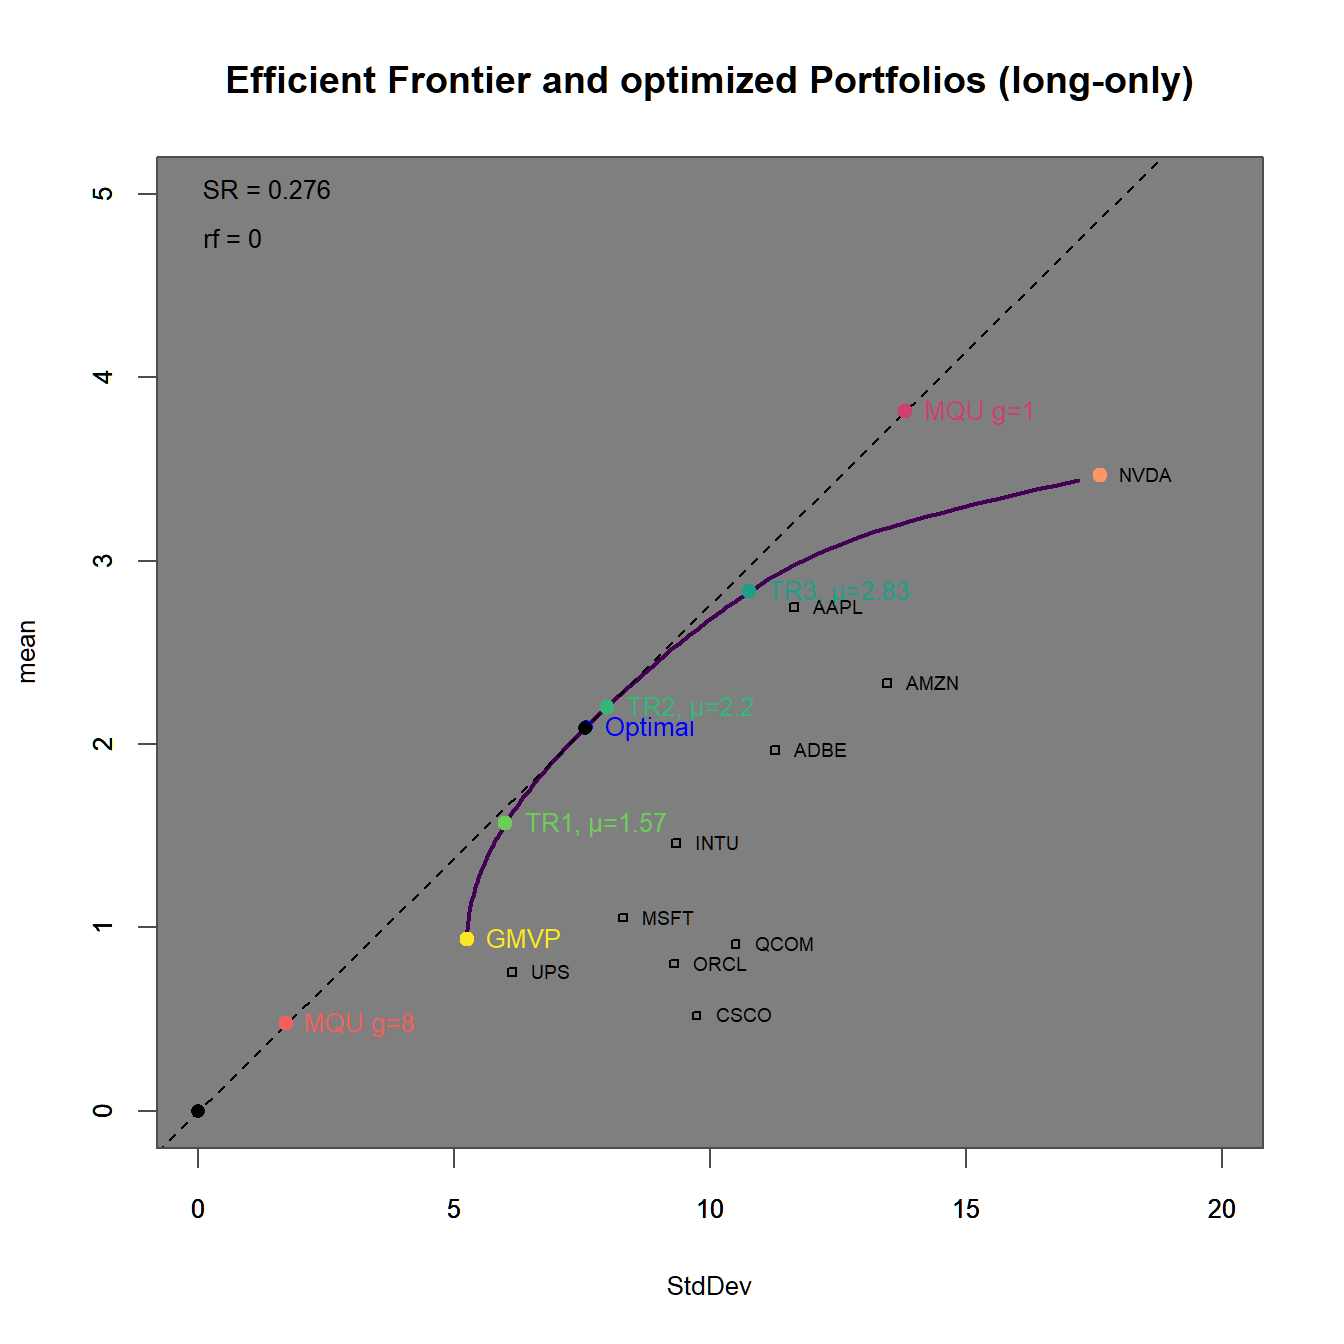 Efficient frontier with an optimized portfolio overlay.